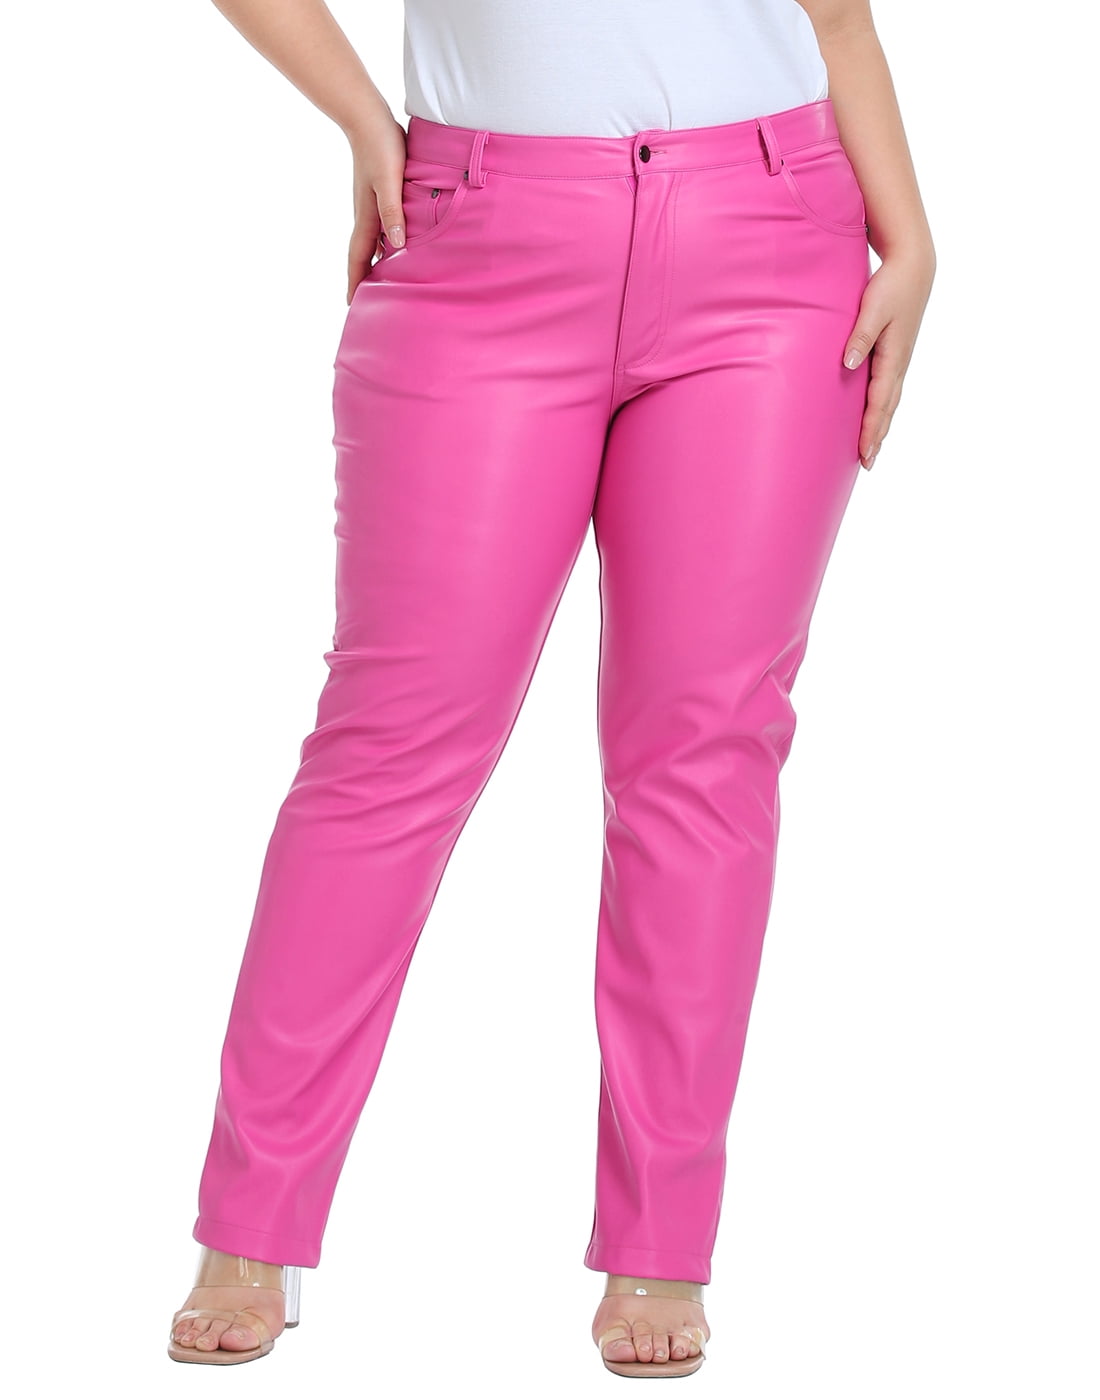 Pink Pants & Capris for Women: Buy Pink Pants & Capris for Women Online at  Low Prices on Snapdeal.com